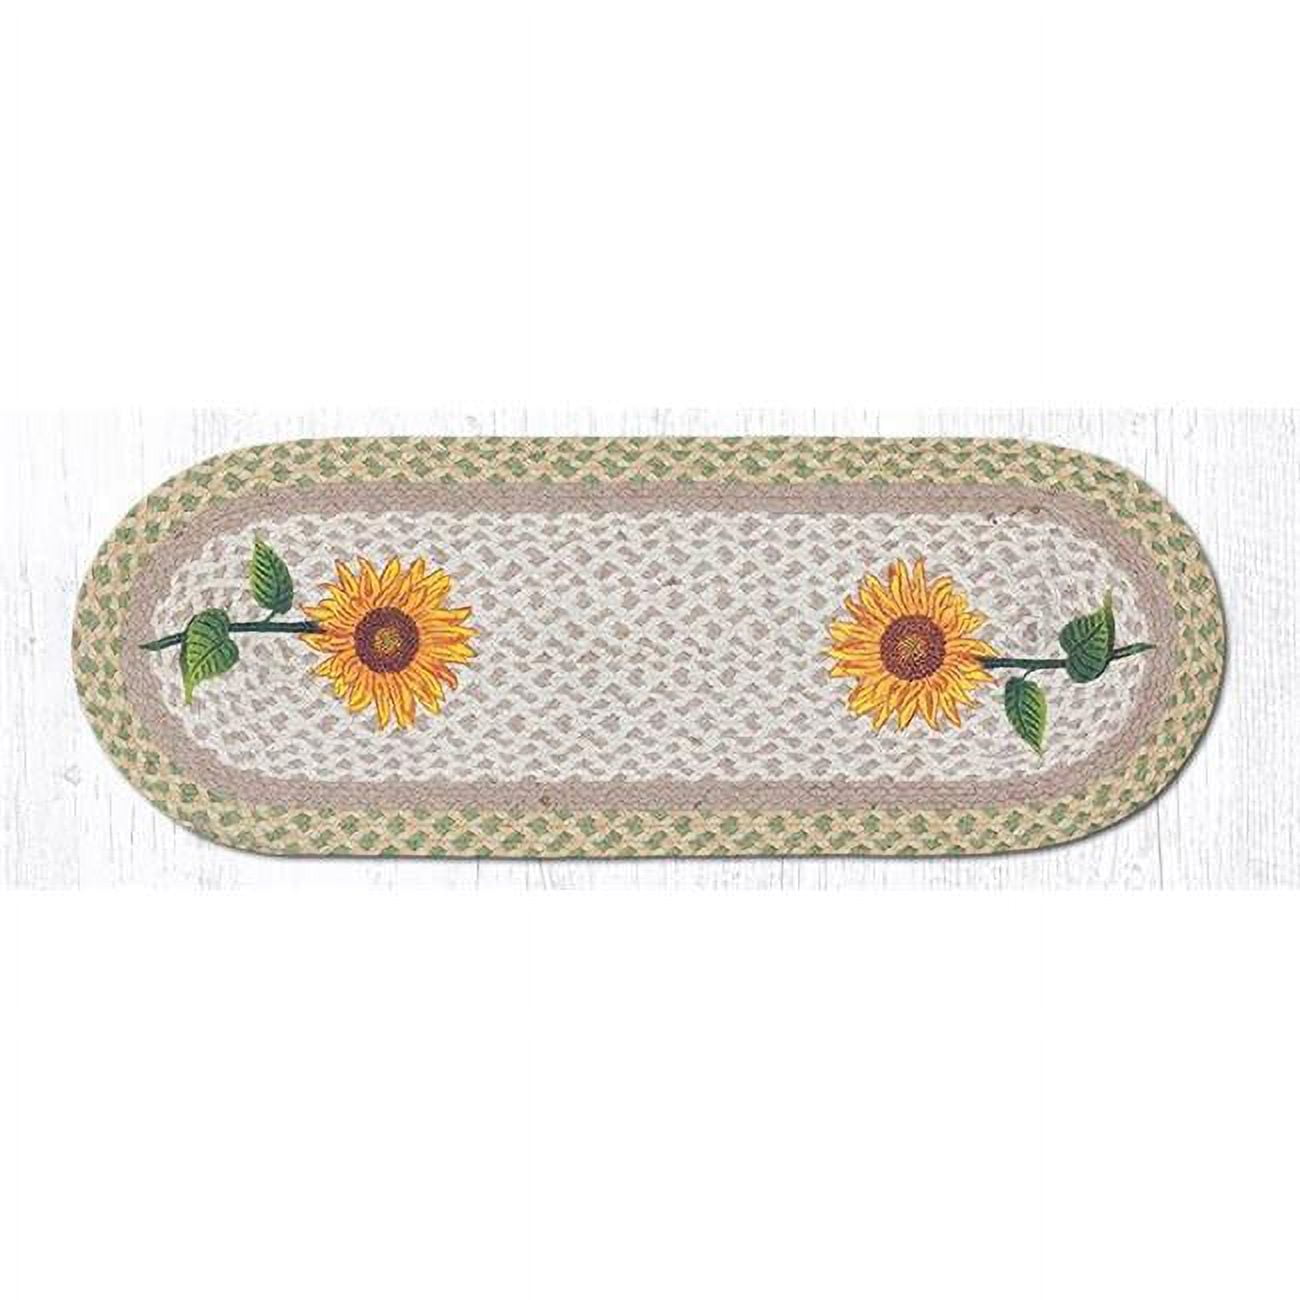 Picture of Capitol Importing 68-529TS 13 x 36 in. Tall Sunflowers Oval Patch Runner Rug